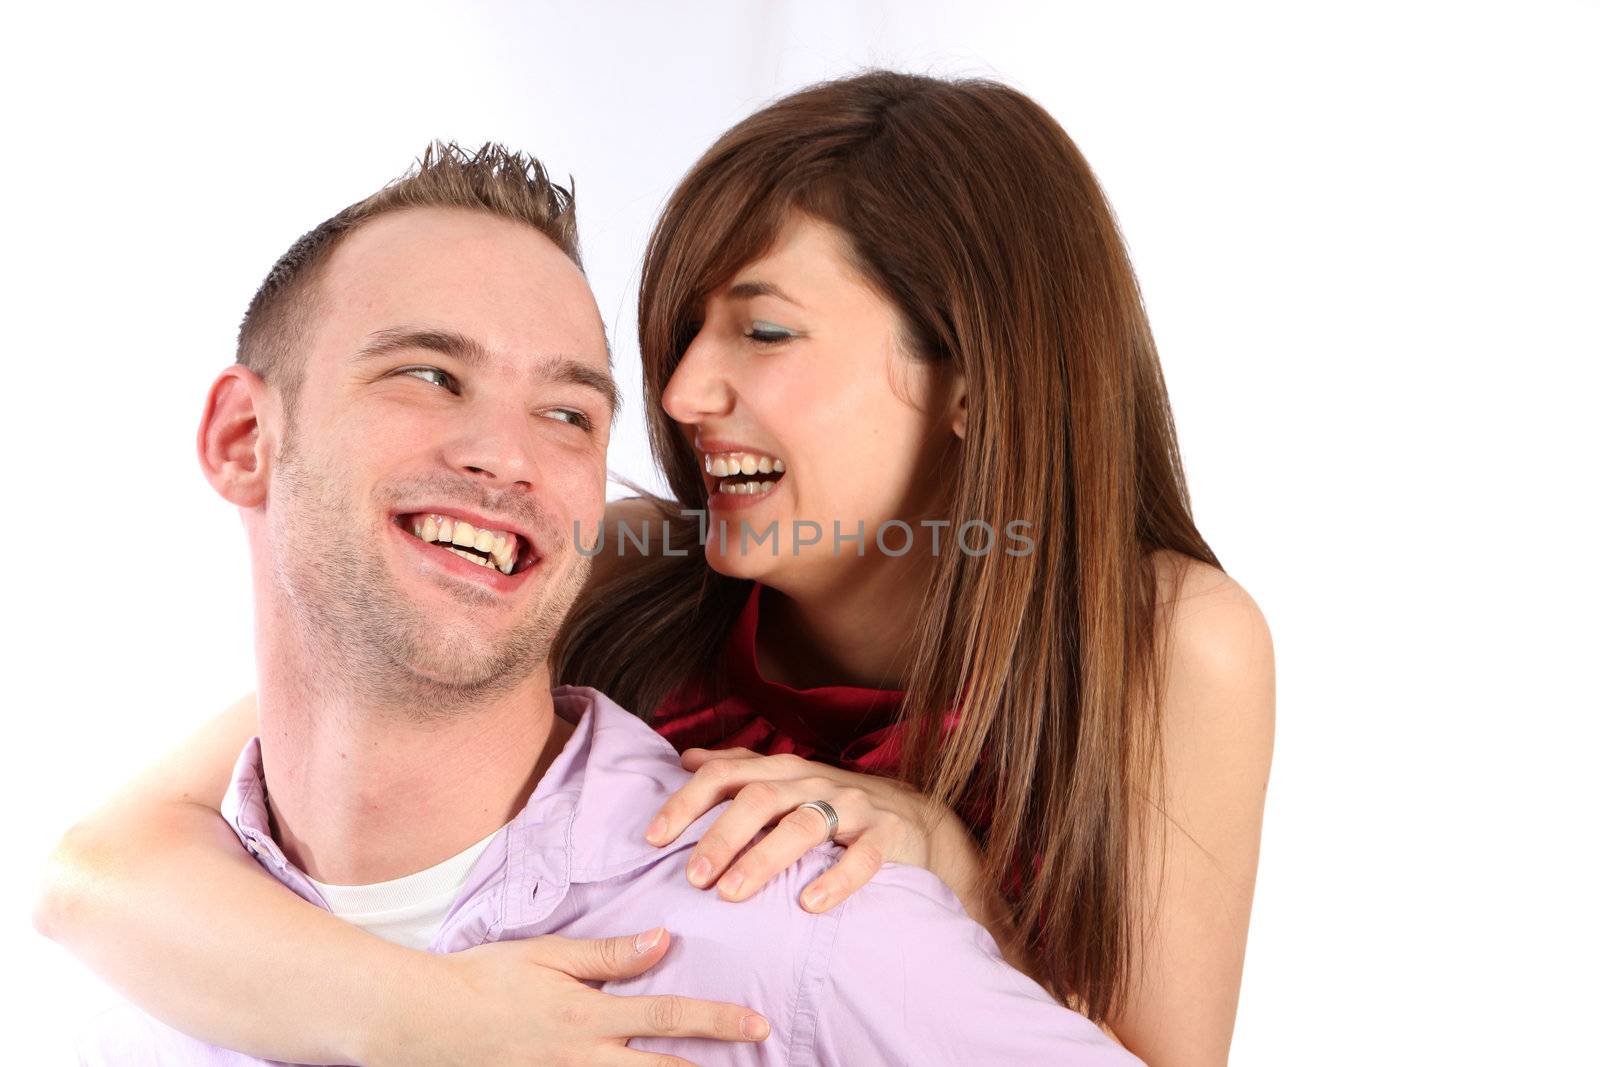 In love, young couple laughing together - space for text